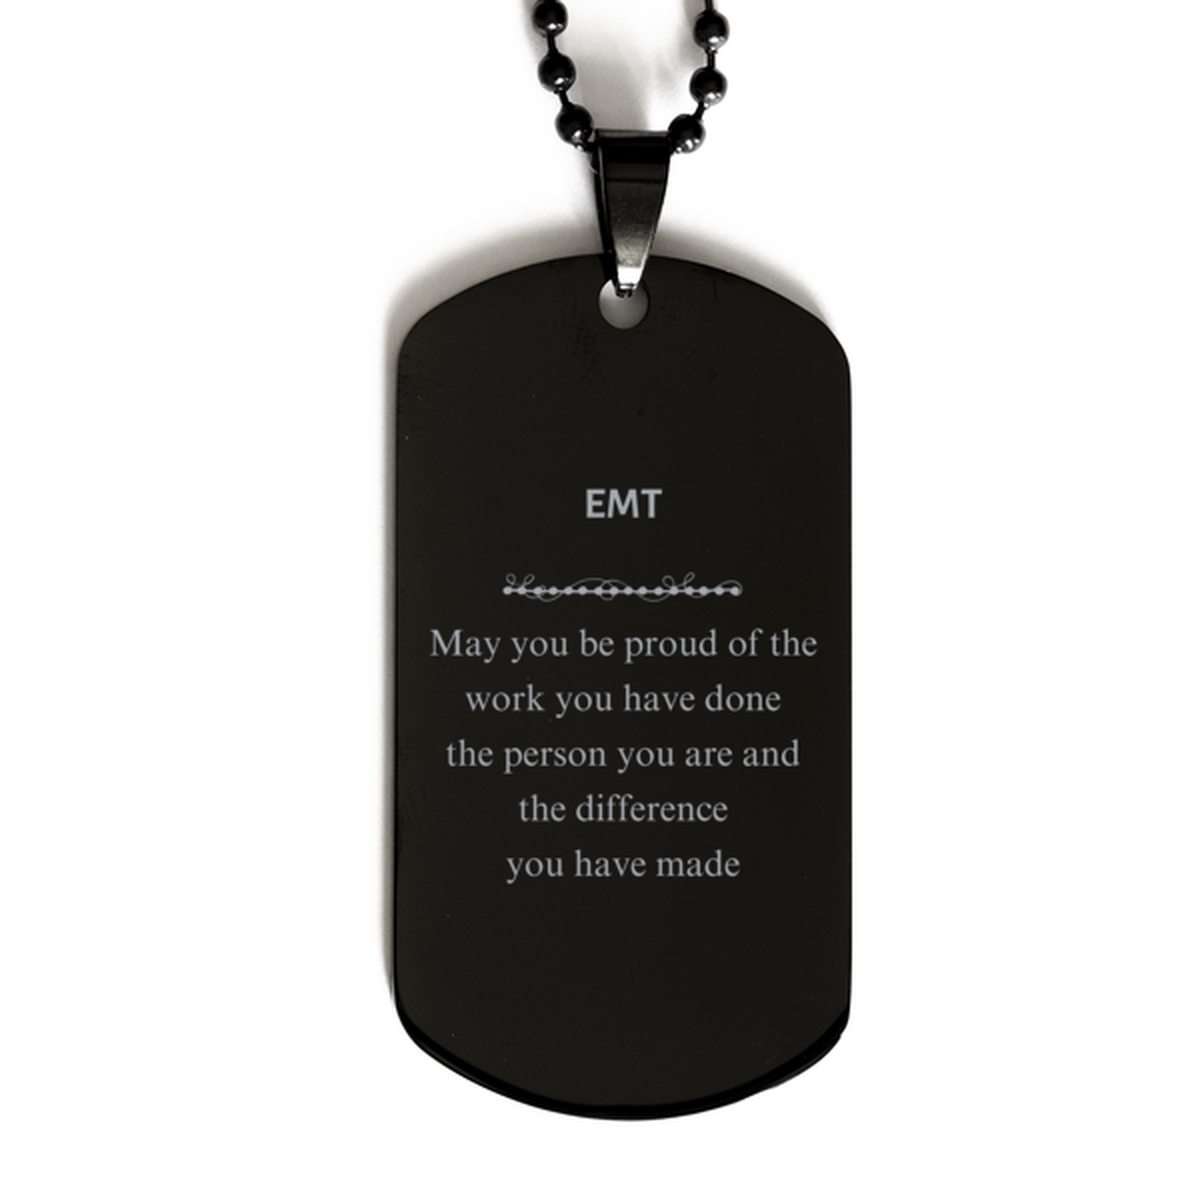 EMT May you be proud of the work you have done, Retirement EMT Black Dog Tag for Colleague Appreciation Gifts Amazing for EMT